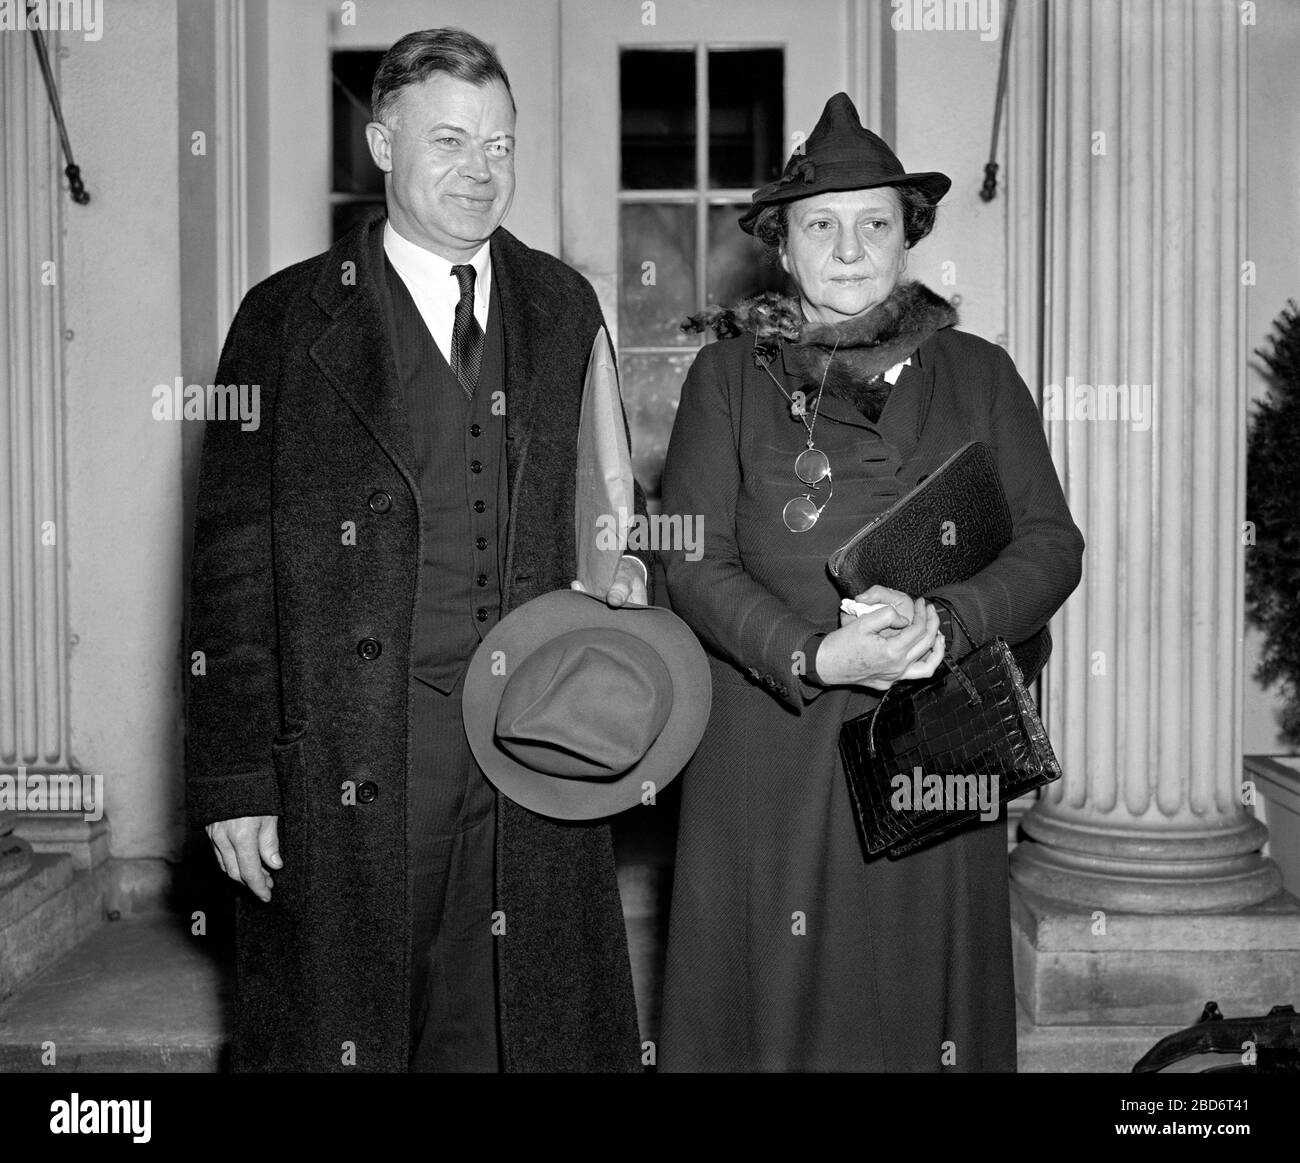 Warren Madden of the National Labor Relations Board and U.S. Secretary of Labor Frances Perkins leaving White House after discussing with U.S. President Franklin Roosevelt a Labor Dispute at Merrimac Mills at Huntsville, Alabama, Washington, D.C., USA, Harris & Ewing, December 6, 1938 Stock Photo